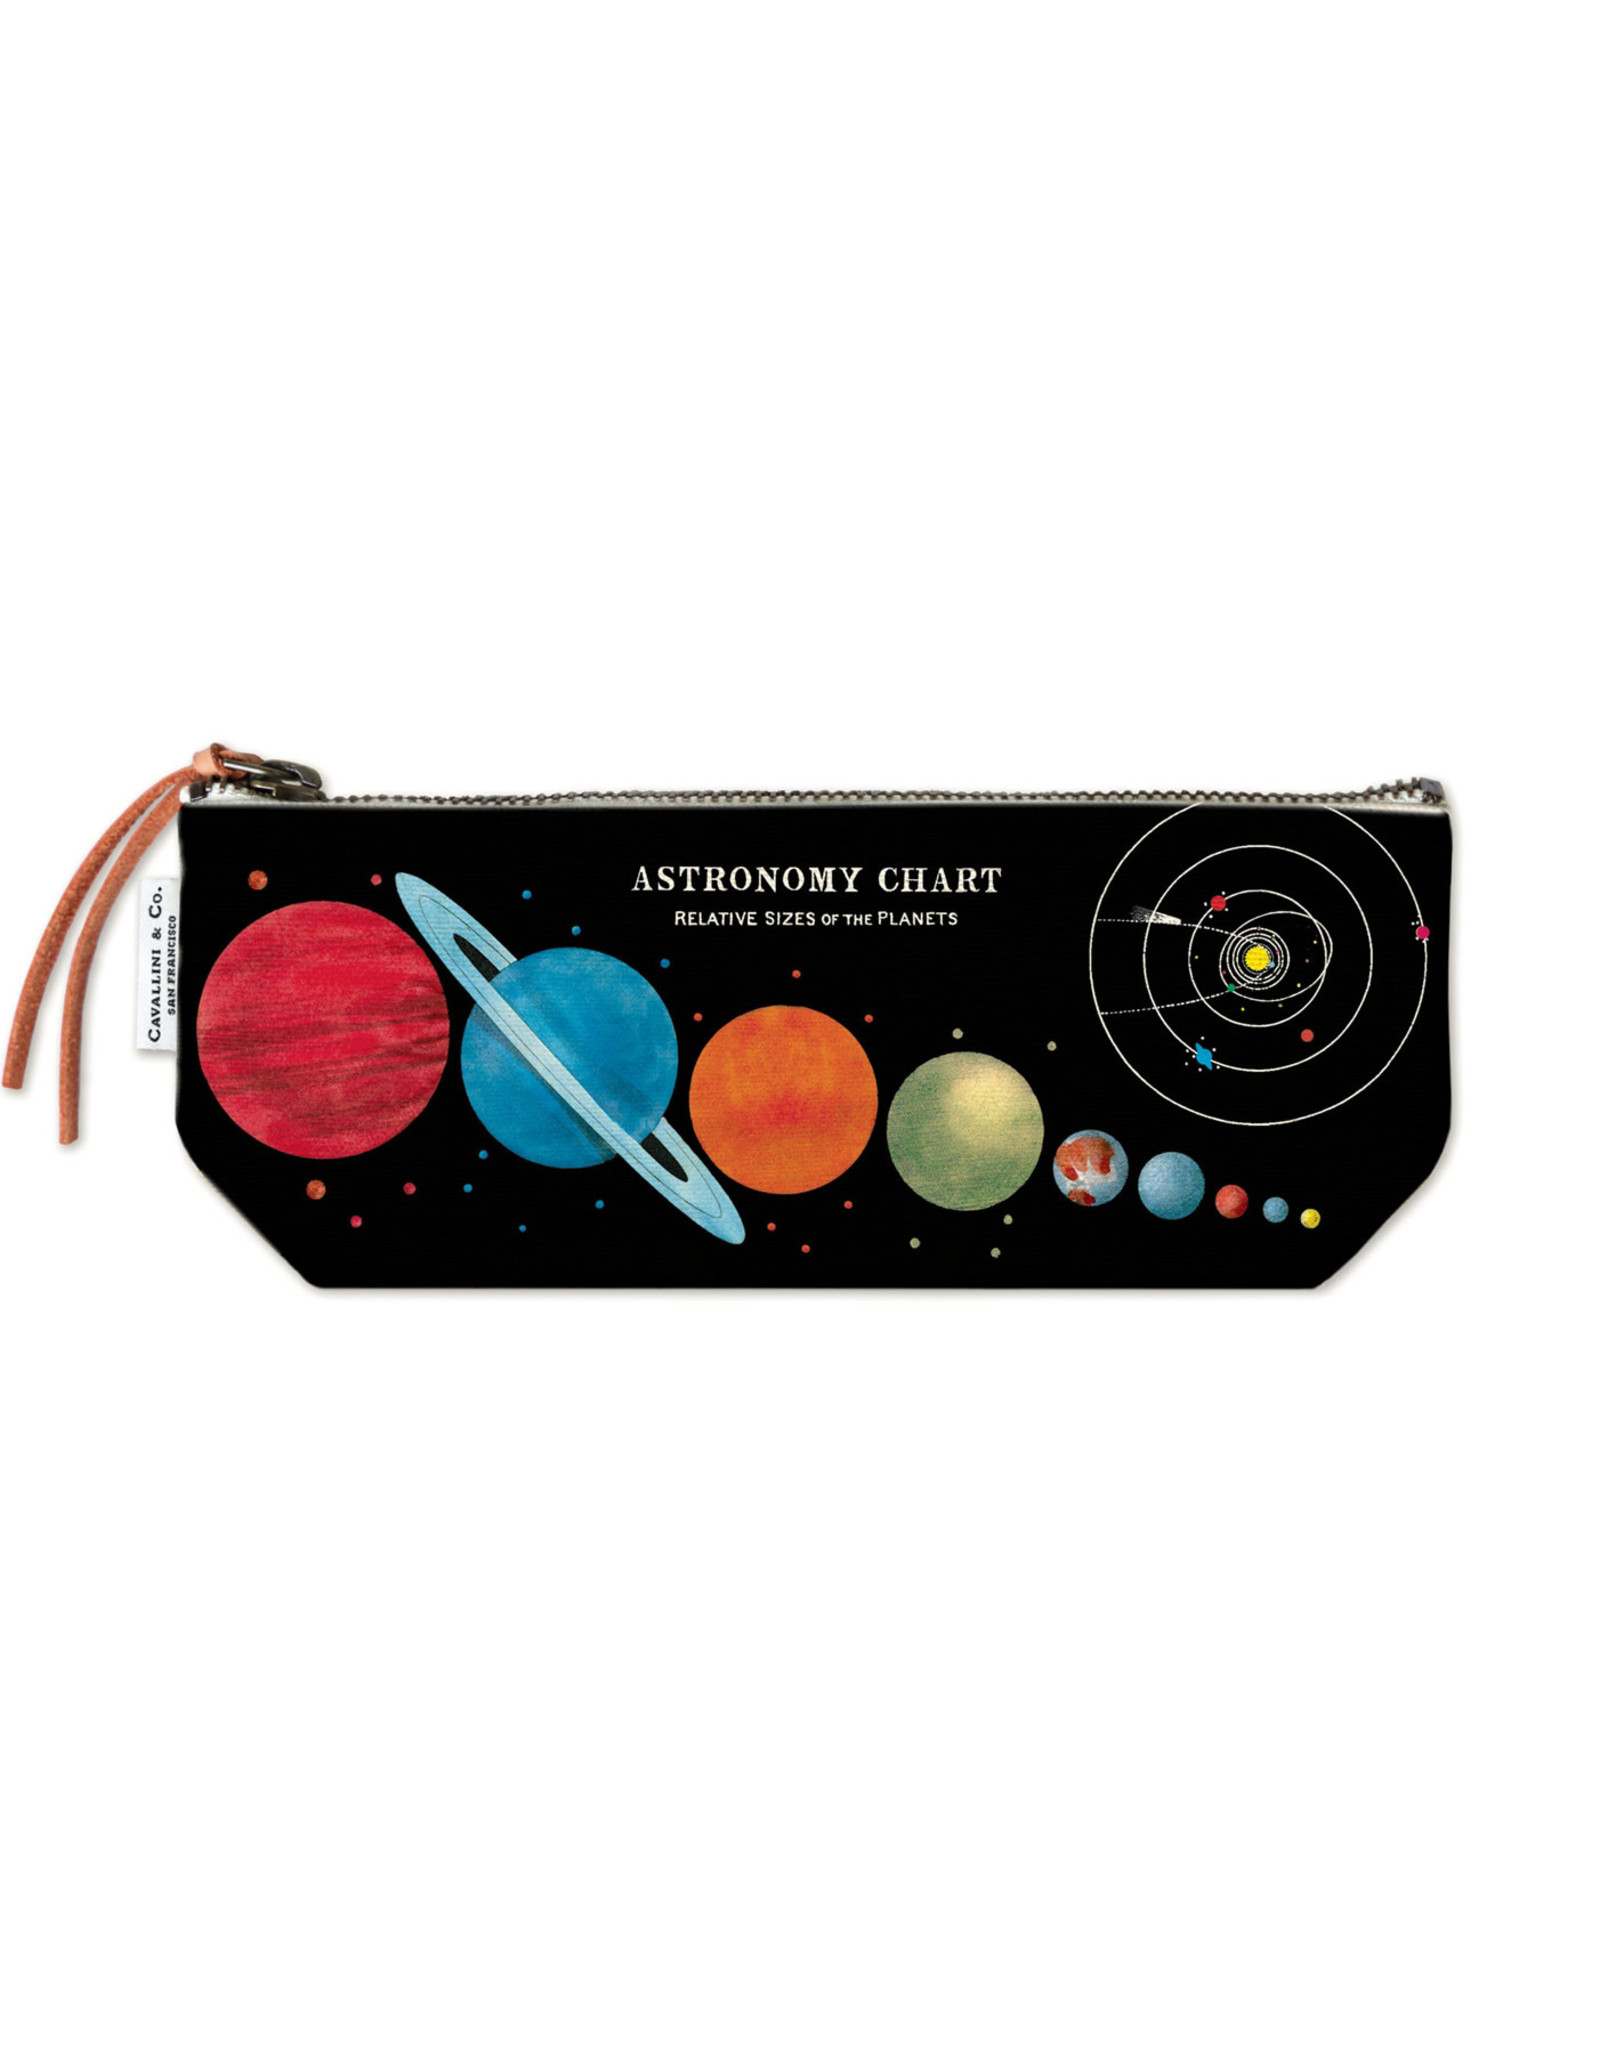 Cavallini Papers & Co. Astronomy Chart Mini Pouch